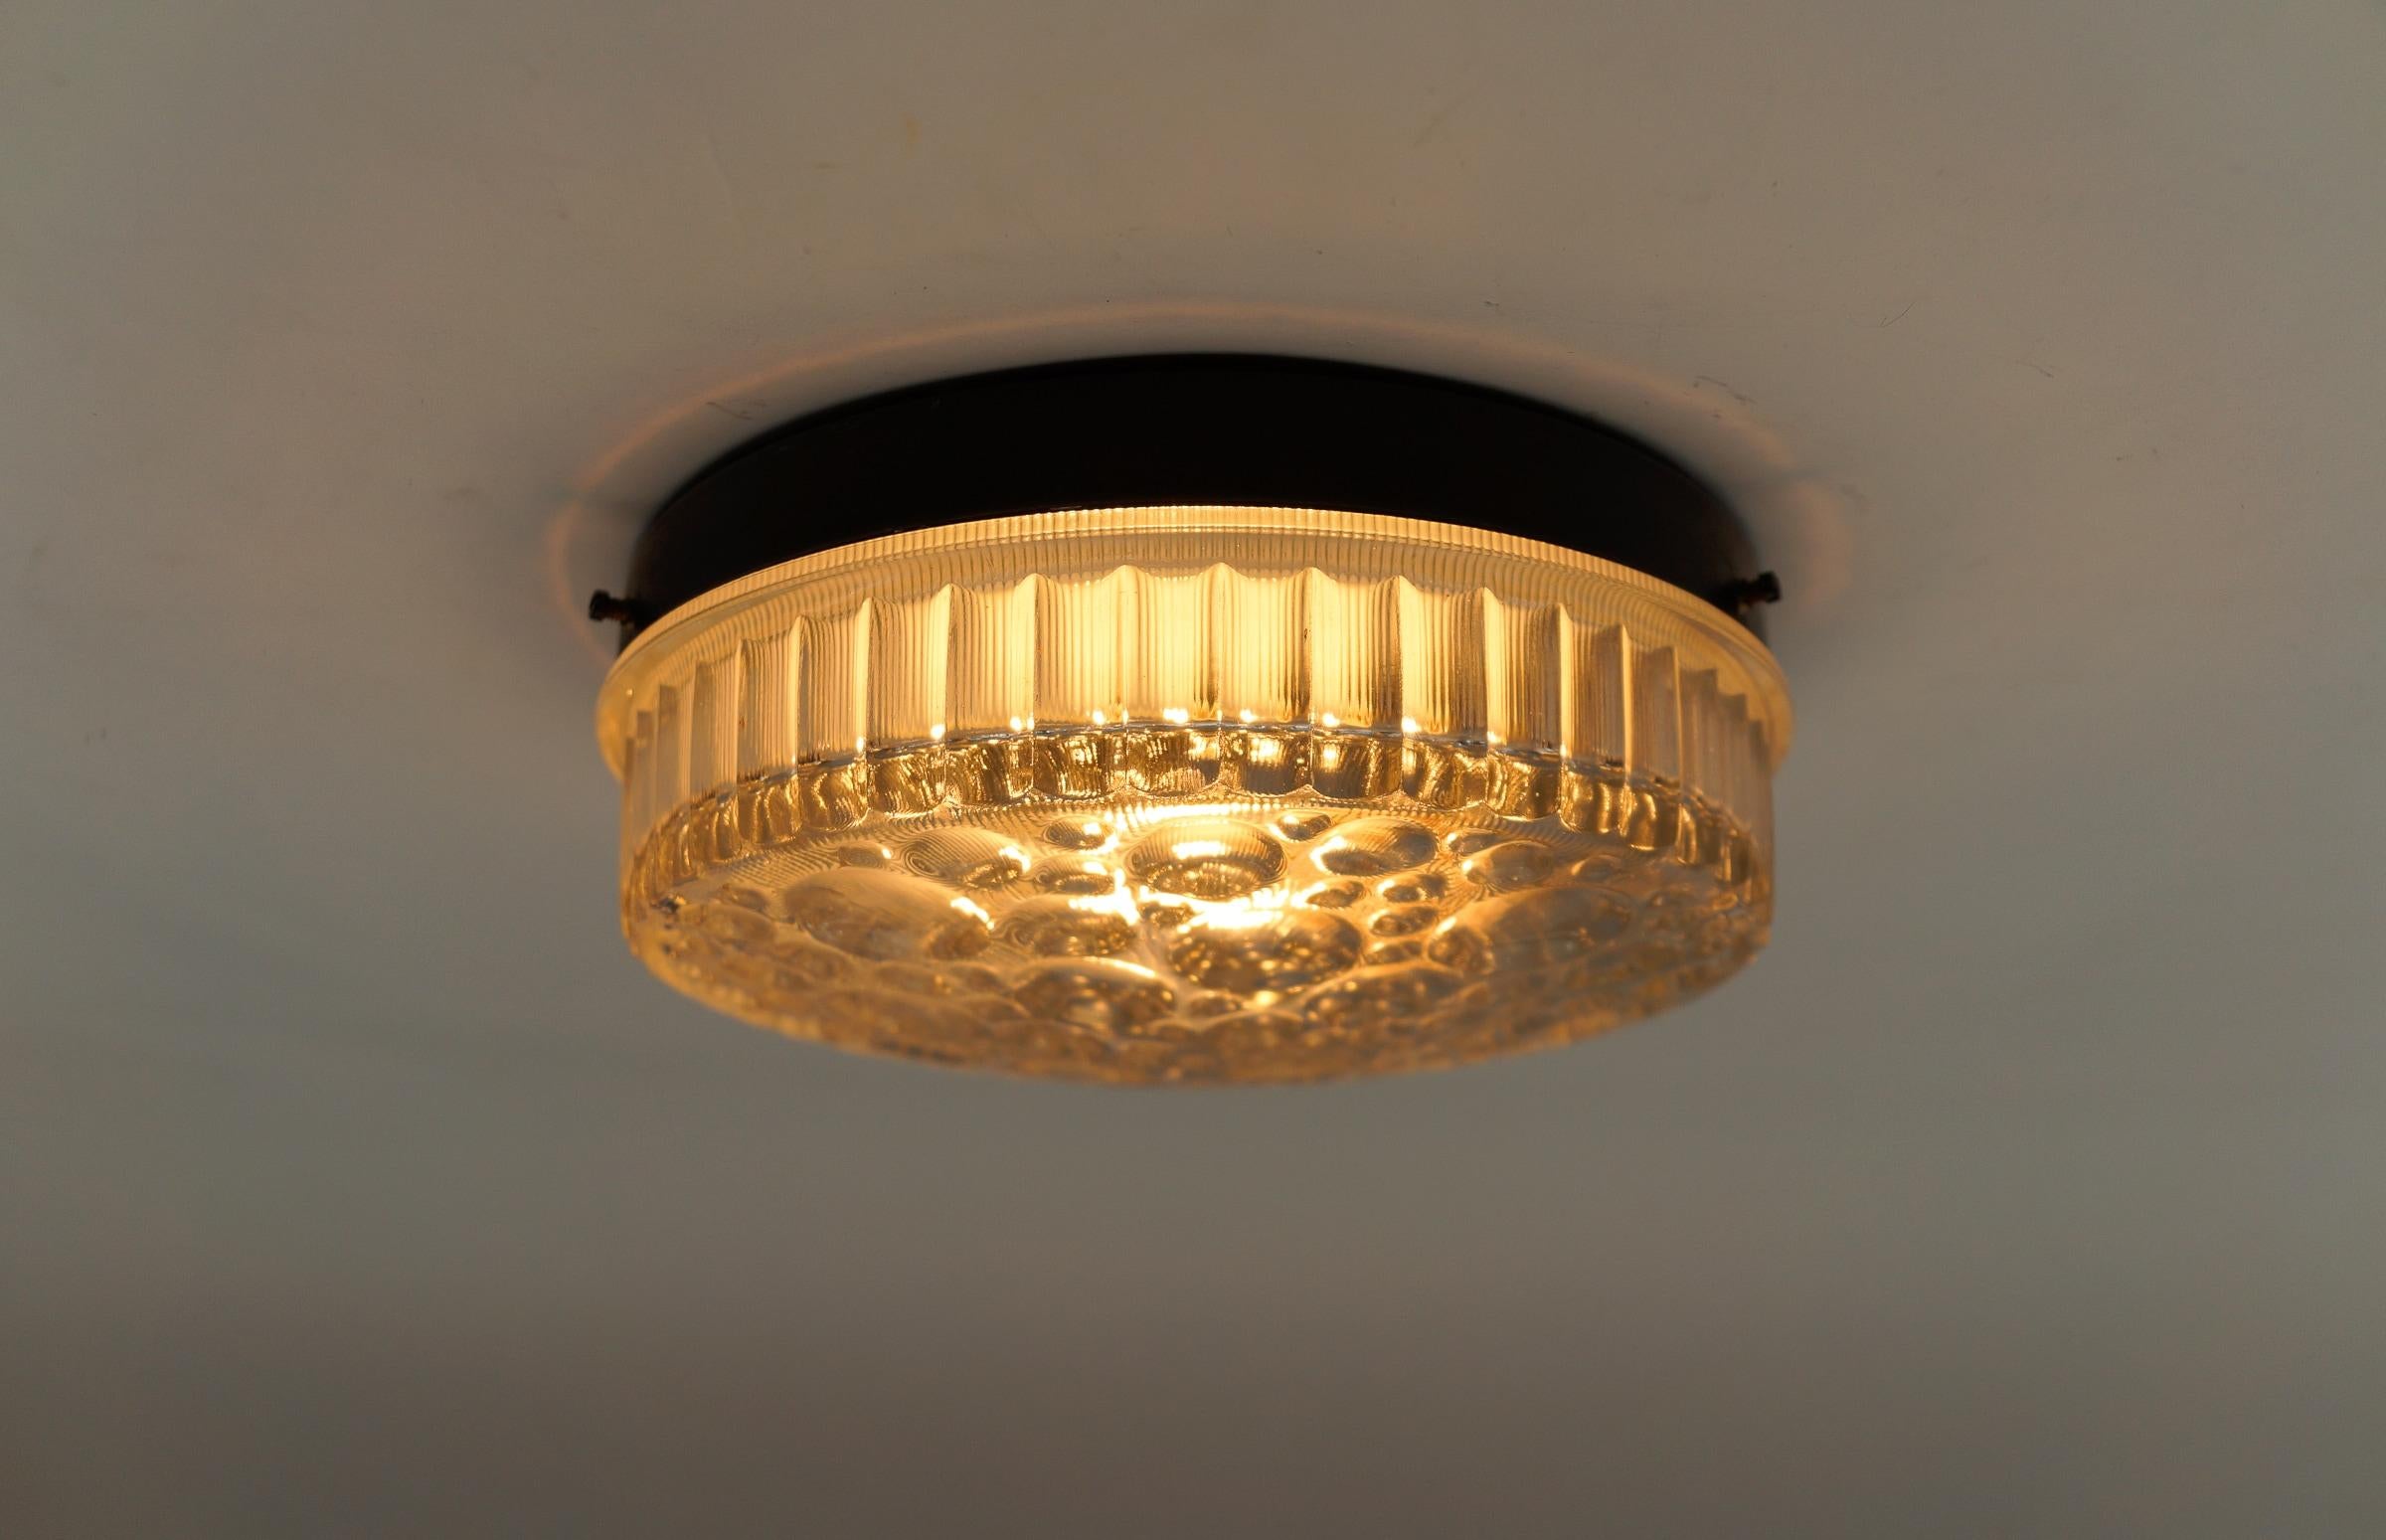 Petite Round Clear Glass Flush Mount, Germany 1960s

Dimensions
Height: 3.14 in. (8 cm)
Diameter: 7.87 in. (20 cm)

The fixture need 1 x E27 standard bulb with 60W max.

Light bulbs are not included.
It is possible to install this fixture in all